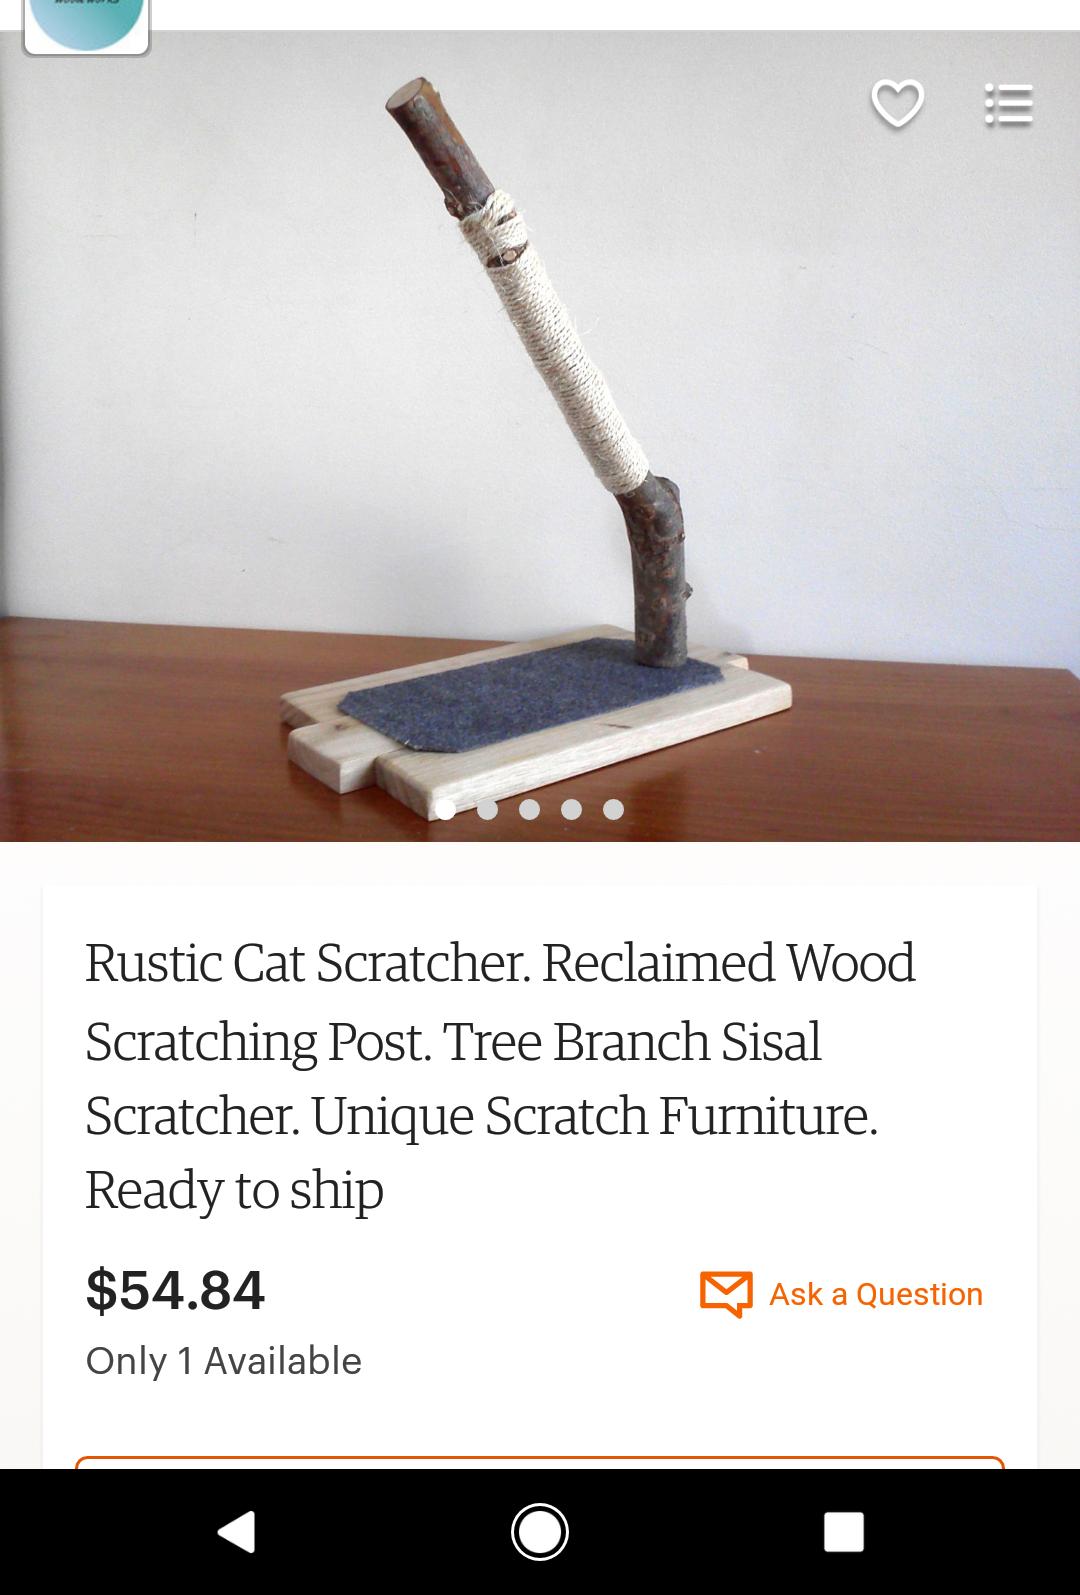 Put some string around a stick, call it "rustic", and you can sell that crap on Etsy.